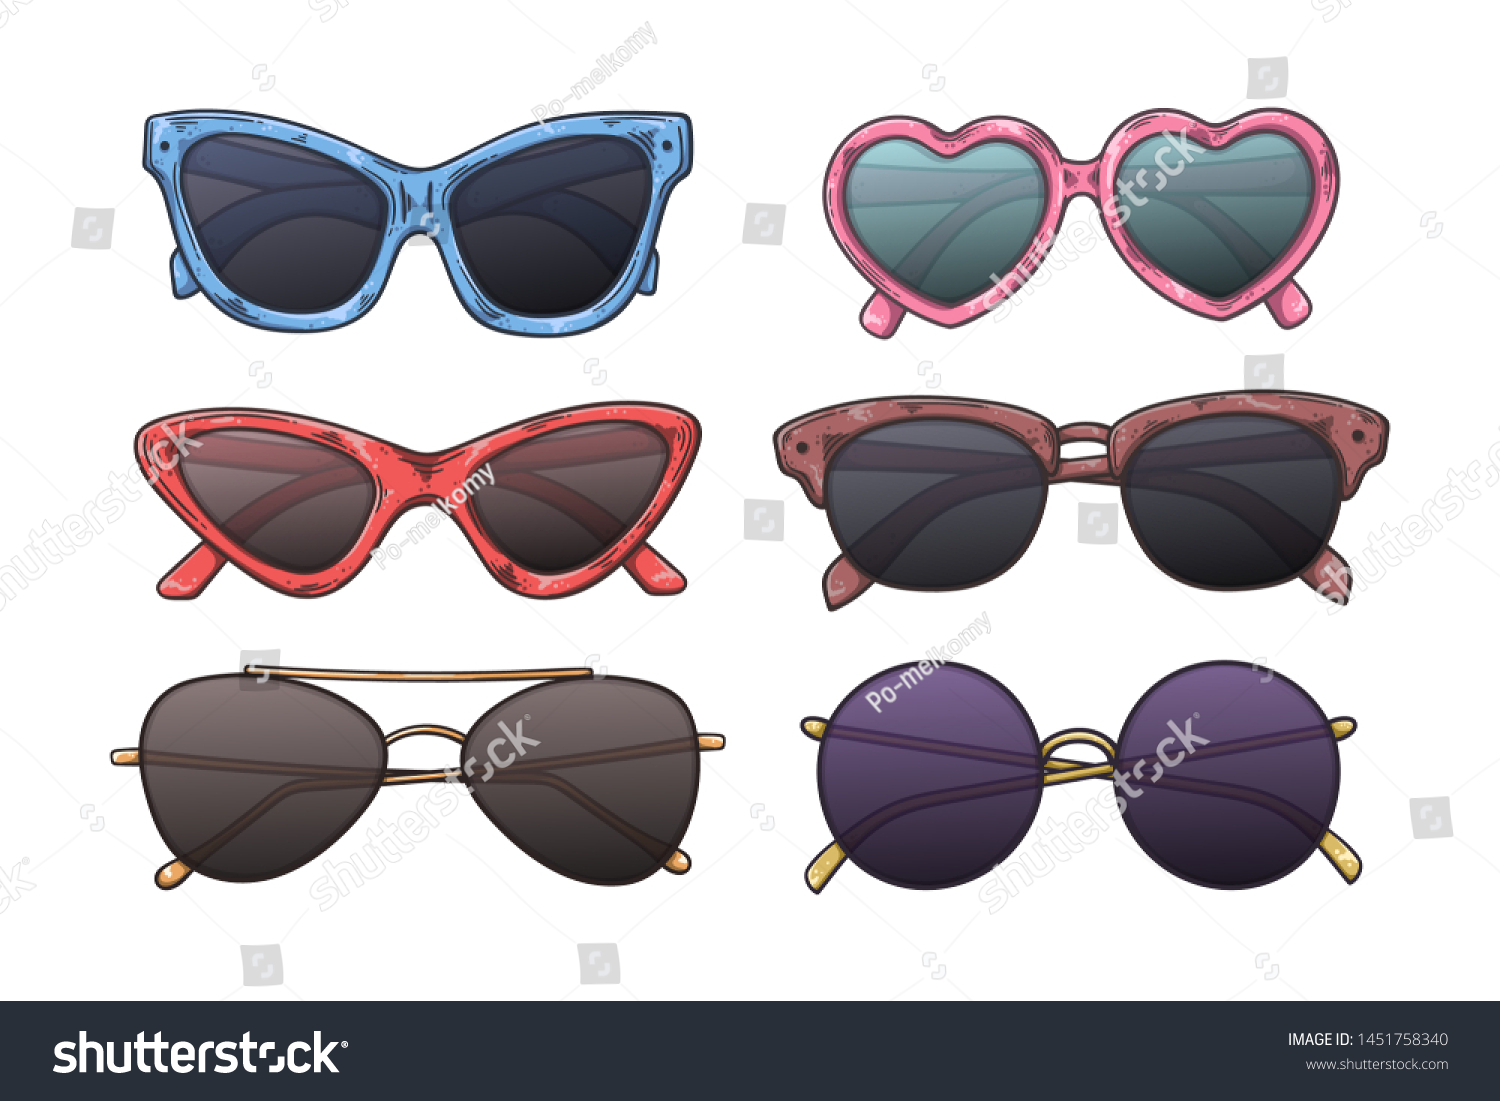 Vector sketching illustrations. Glasses in vintage style. Isolated objects for your design. Each object can be changed and moved. #1451758340